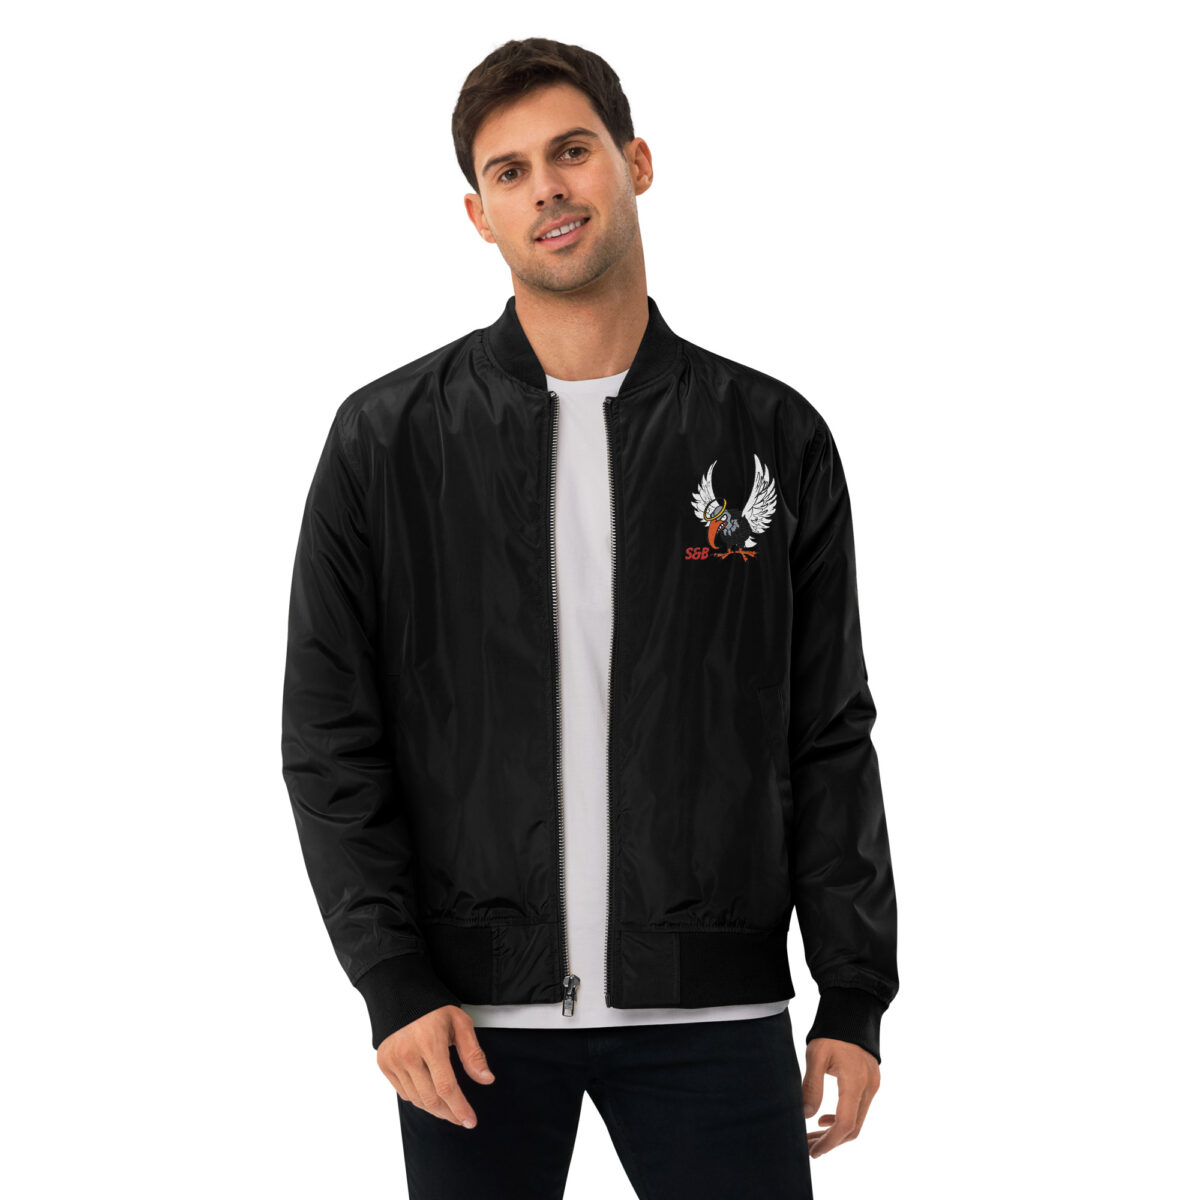 premium-recycled-bomber-jacket-black-front-653d6fa351966.jpg